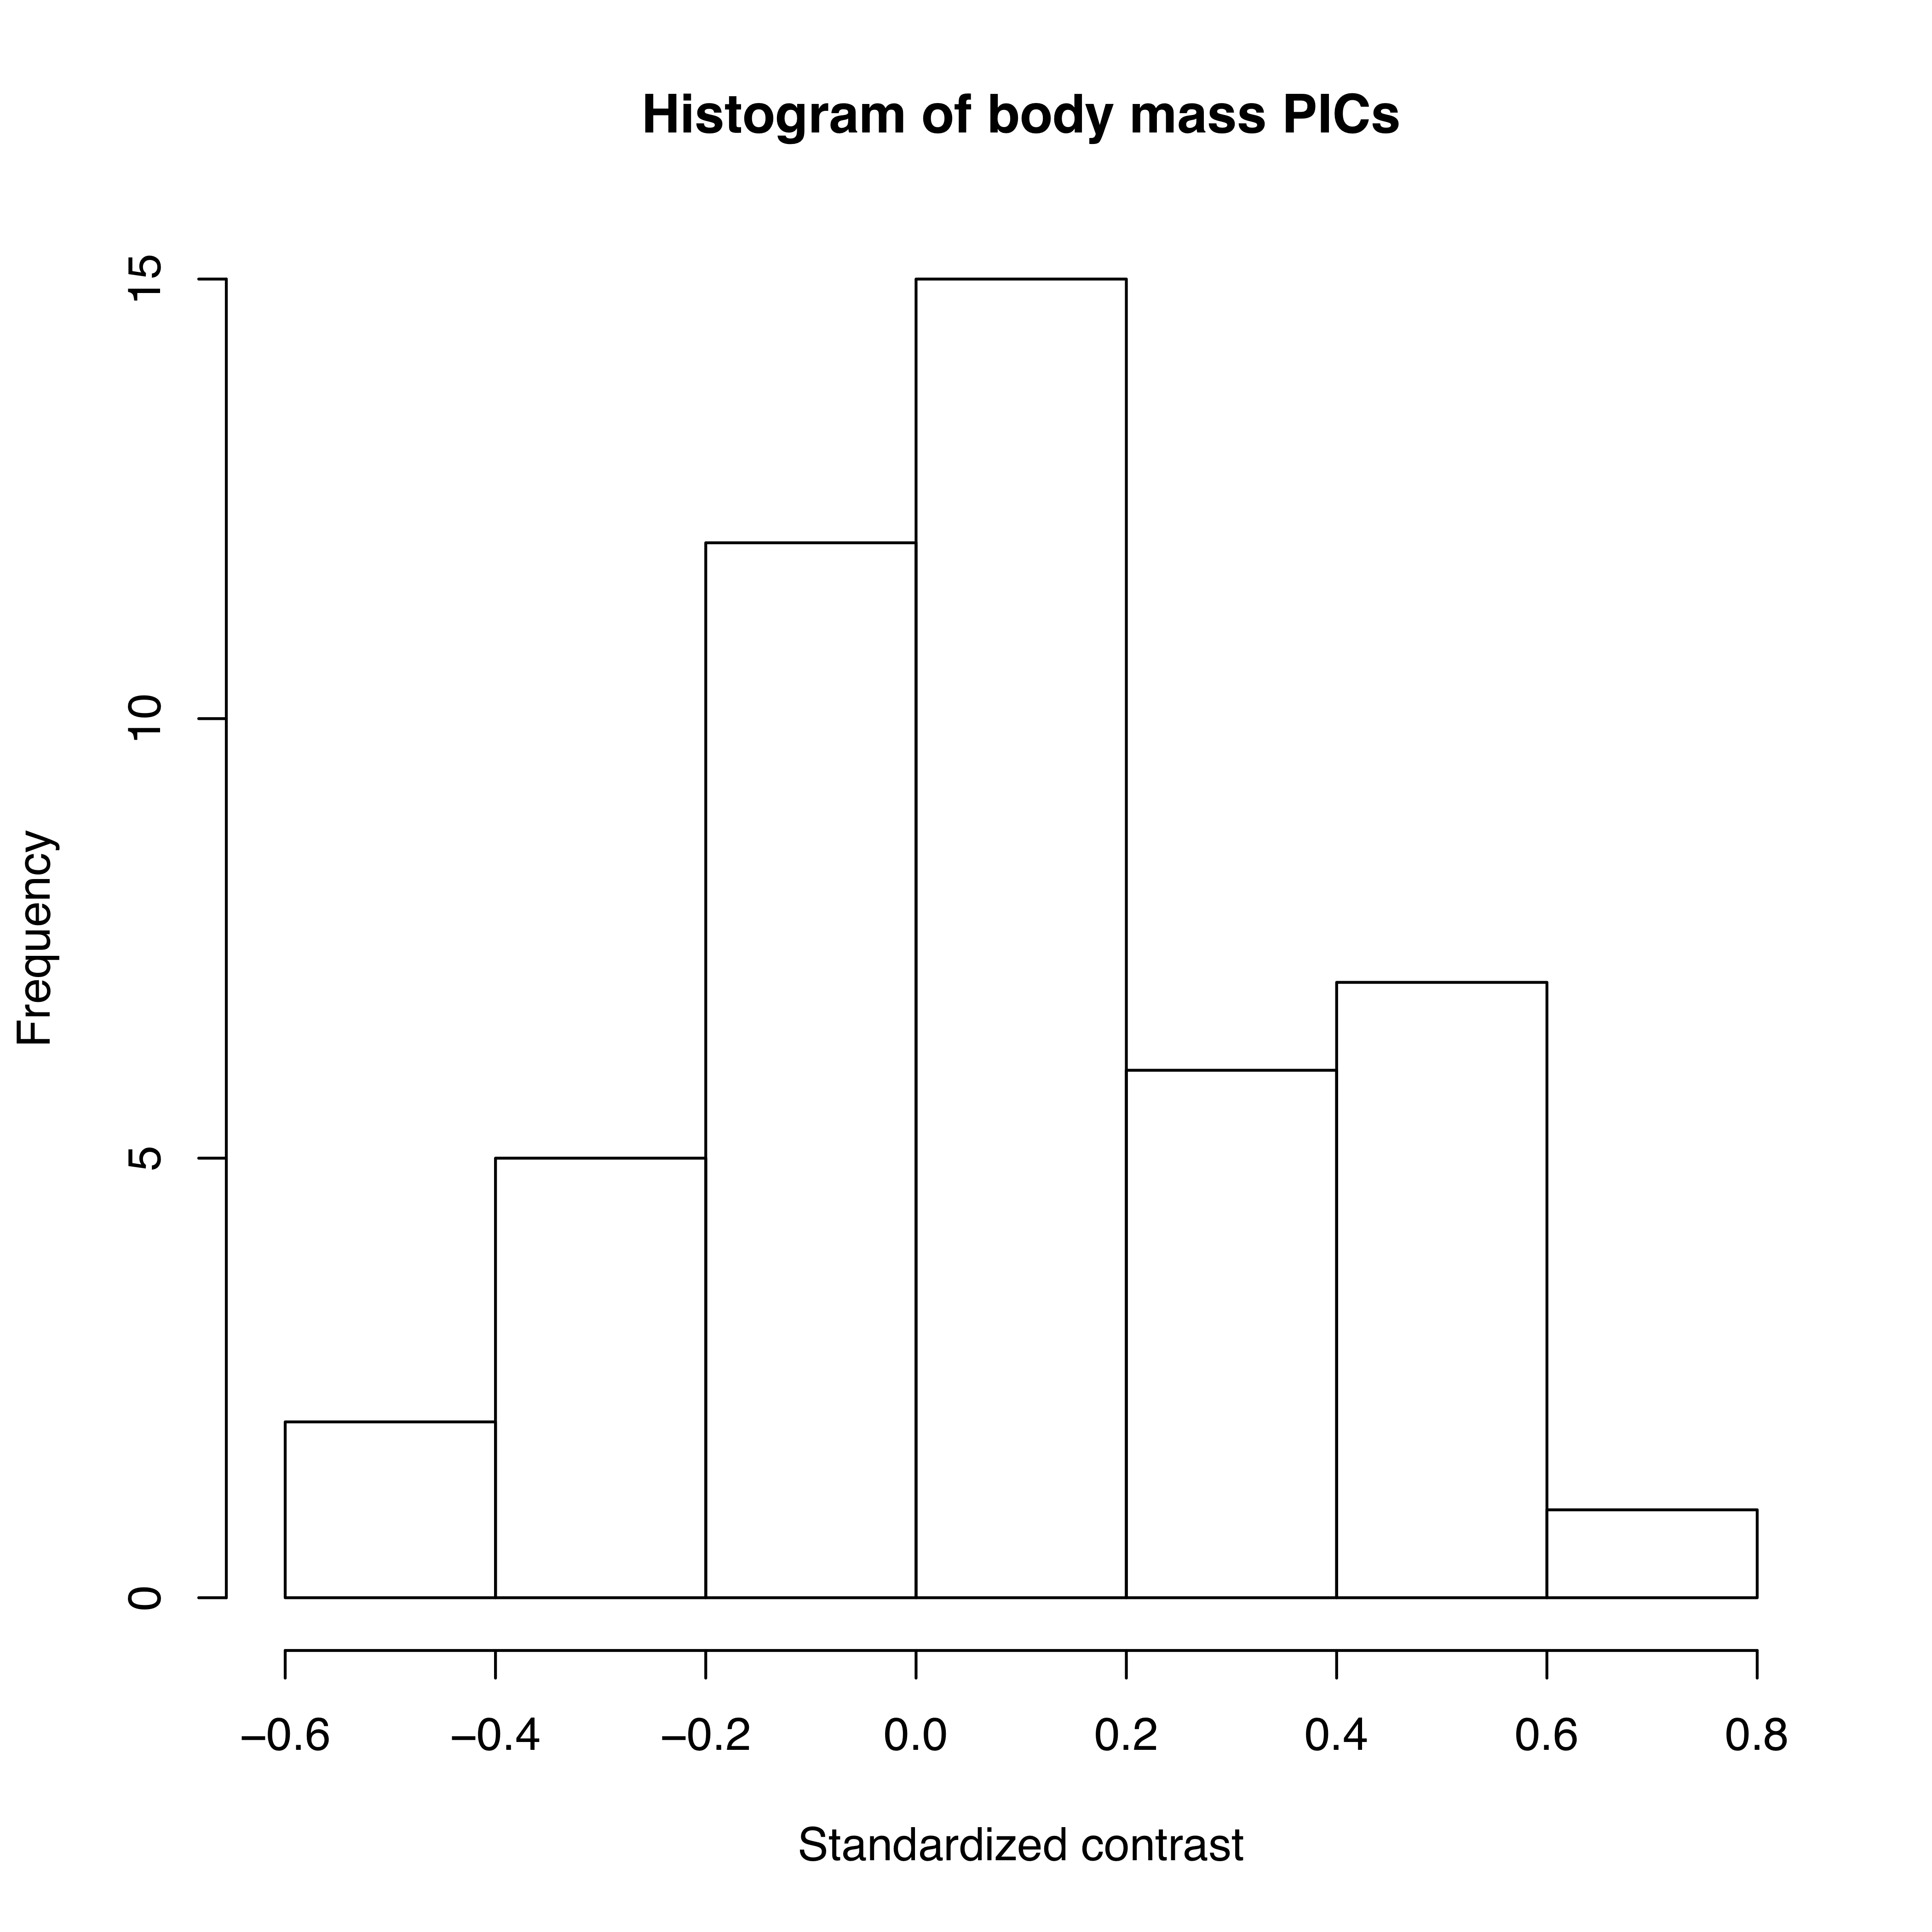 Figure 4.2. Histogram of PICs for ln-transformed mammal body mass on a phylogenetic tree with branch lengths in millions of years data from(data from Garland 1992). Image by the author, can be reused under a CC-BY-4.0 license.